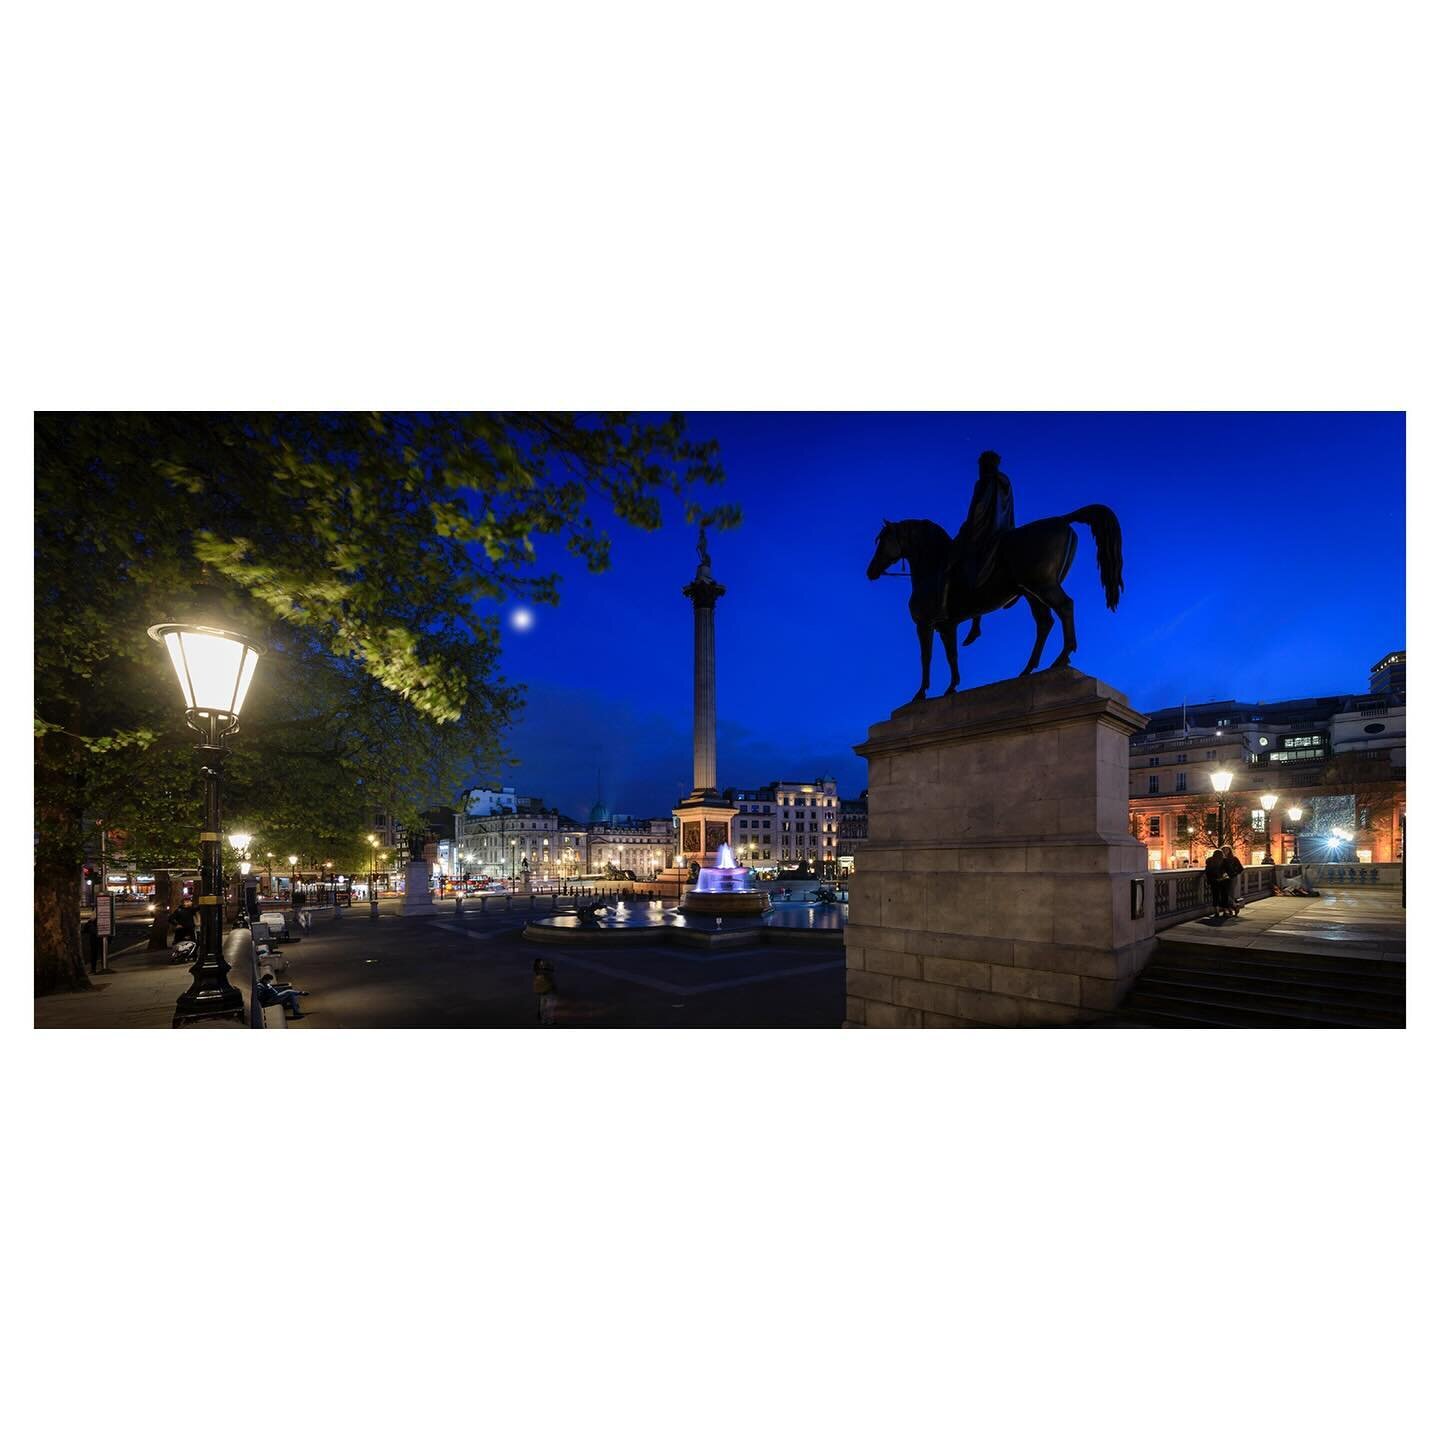 A selection of my London landscapes available to buy as prints here 👇
 website https://www.cannonphotos.com/ 
Link also below in comments&hellip;
🎄🎅
.
.
.
.
.
#londonlandscape #printsforsale #photography #cannonphotosltd #trafalgarsquare #batterse